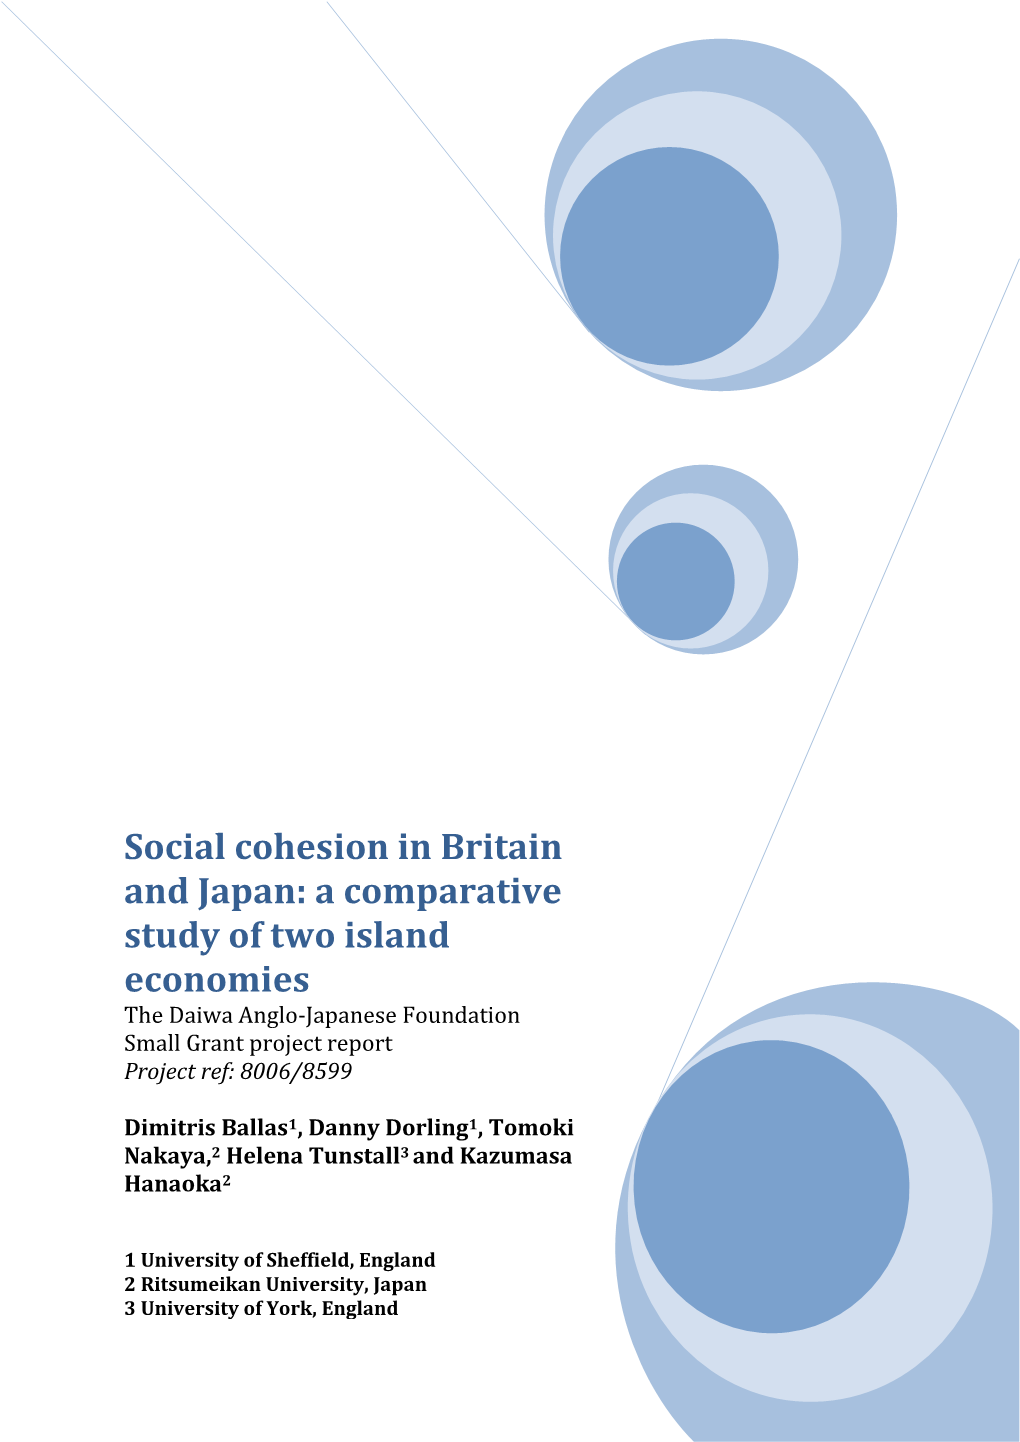 Social Cohesion in Britain and Japan: a Comparative Study of Two Island